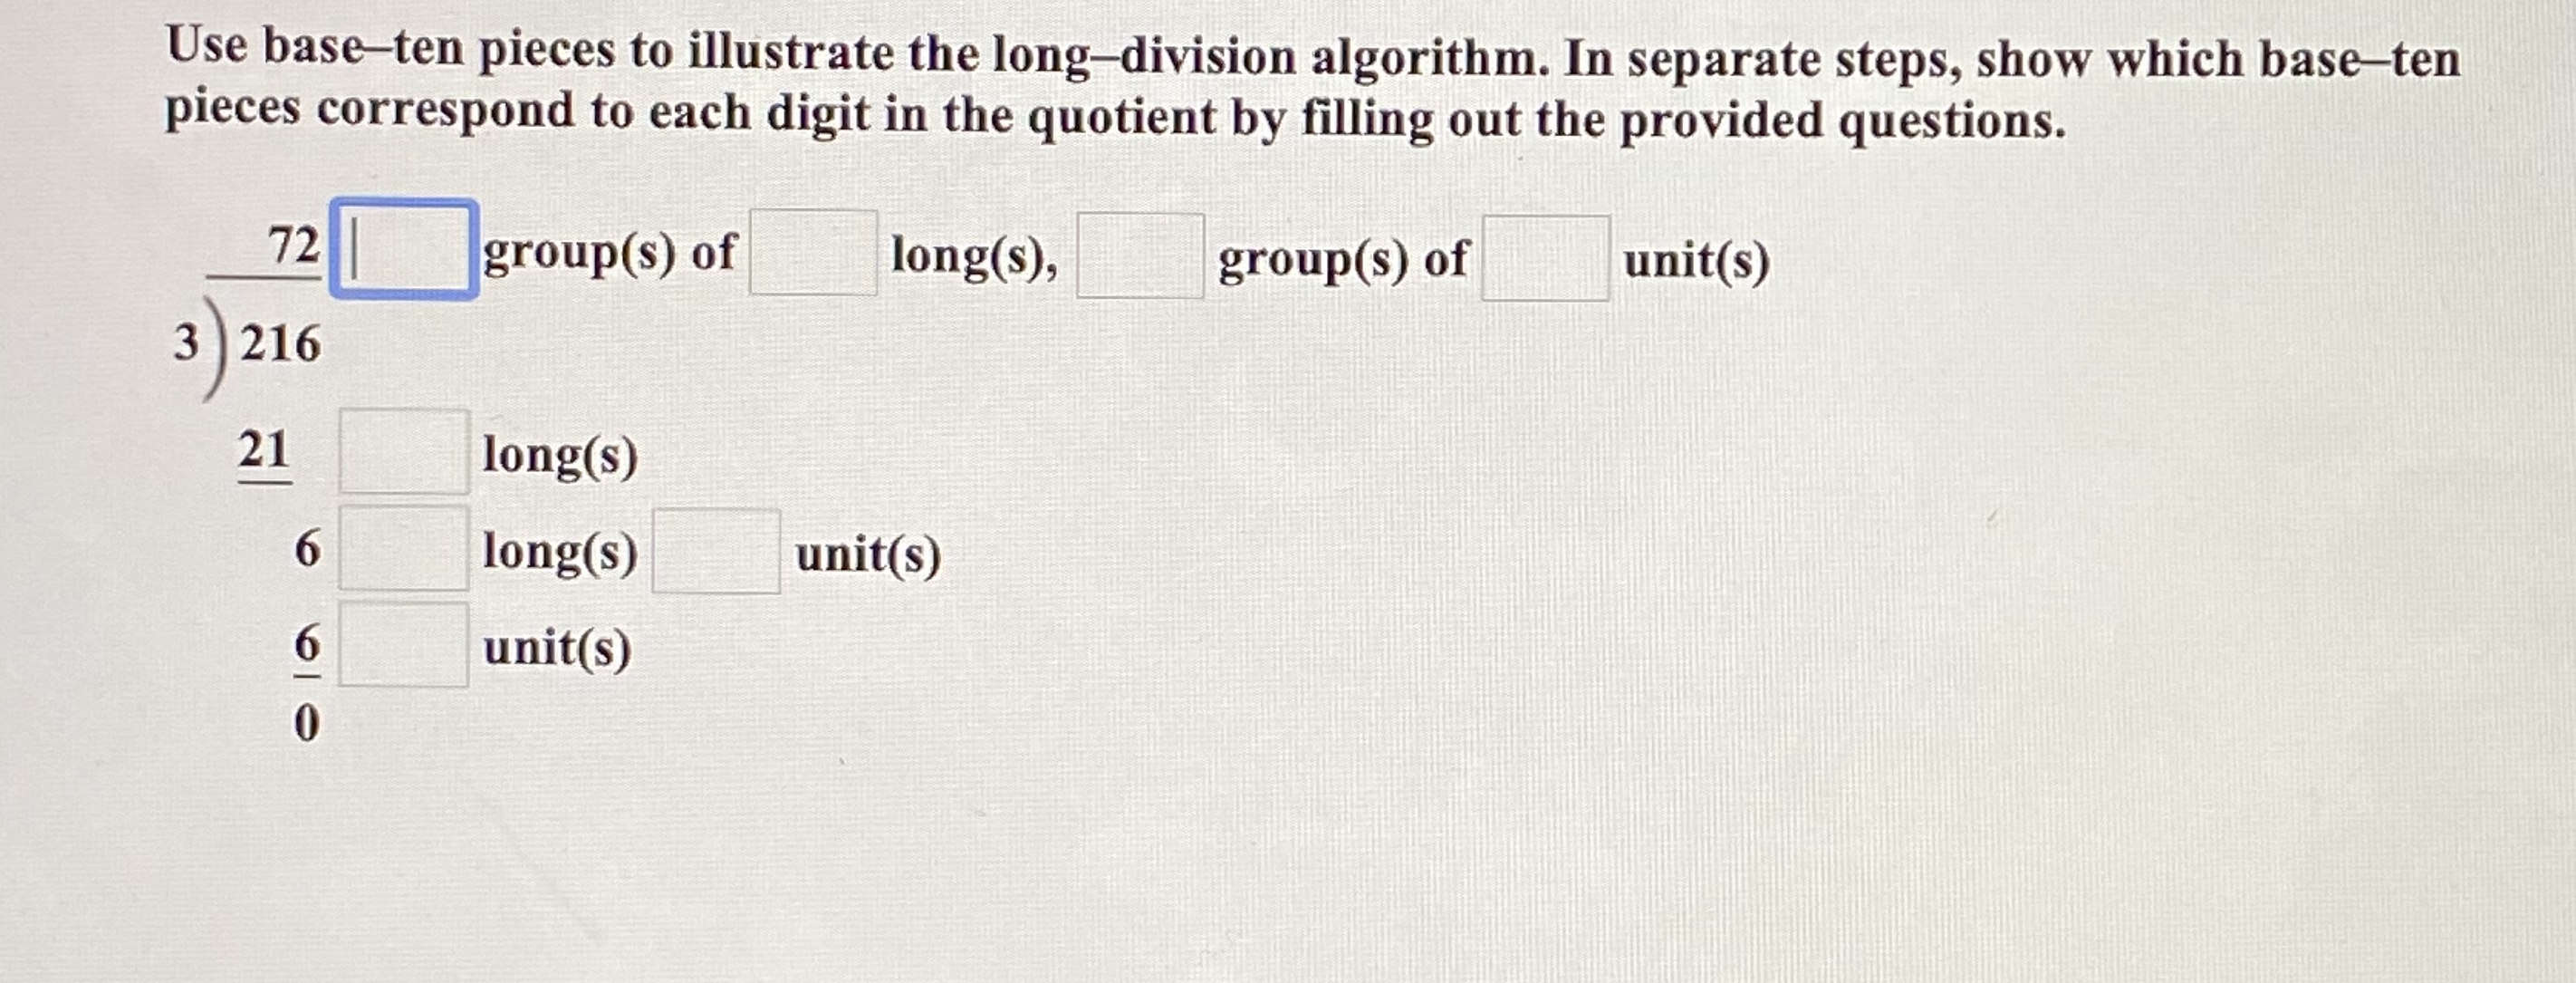 Use base-ten pieces to illustrate the long-division algorithm. In separate steps, show which base-ten
pieces correspond to each digit in the quotient by filling out the provided questions.
72 group(s) of
long(s),
group(s) of
unit(s)
3 216
21
long(s)
6.
long(s)
unit(s)
unit(s)
